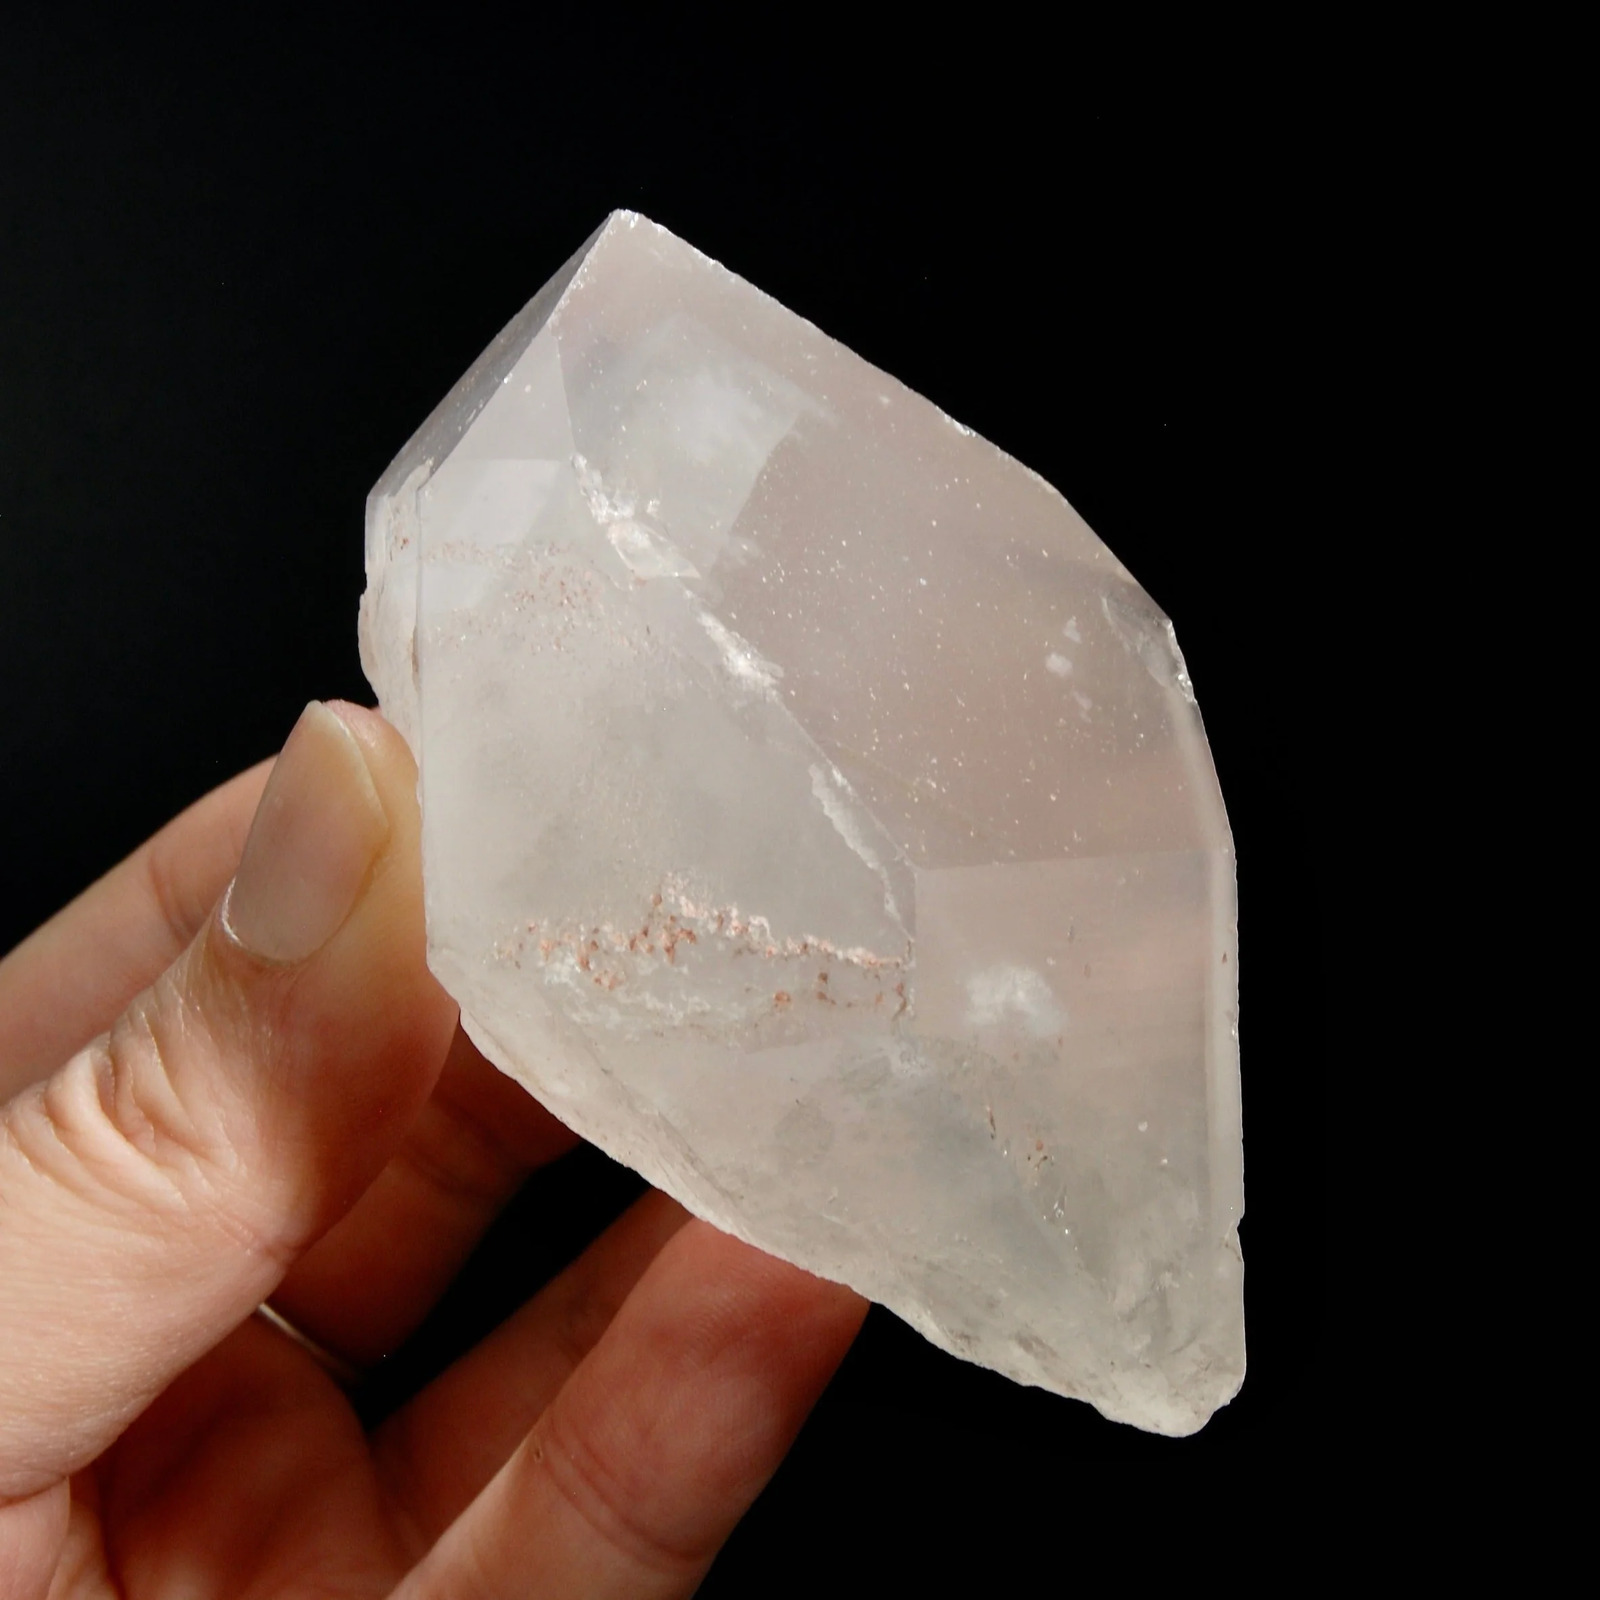 3in 192g RARE Large Trans Channeler Pink Lithium Lemurian Seed Quartz Crystal, R